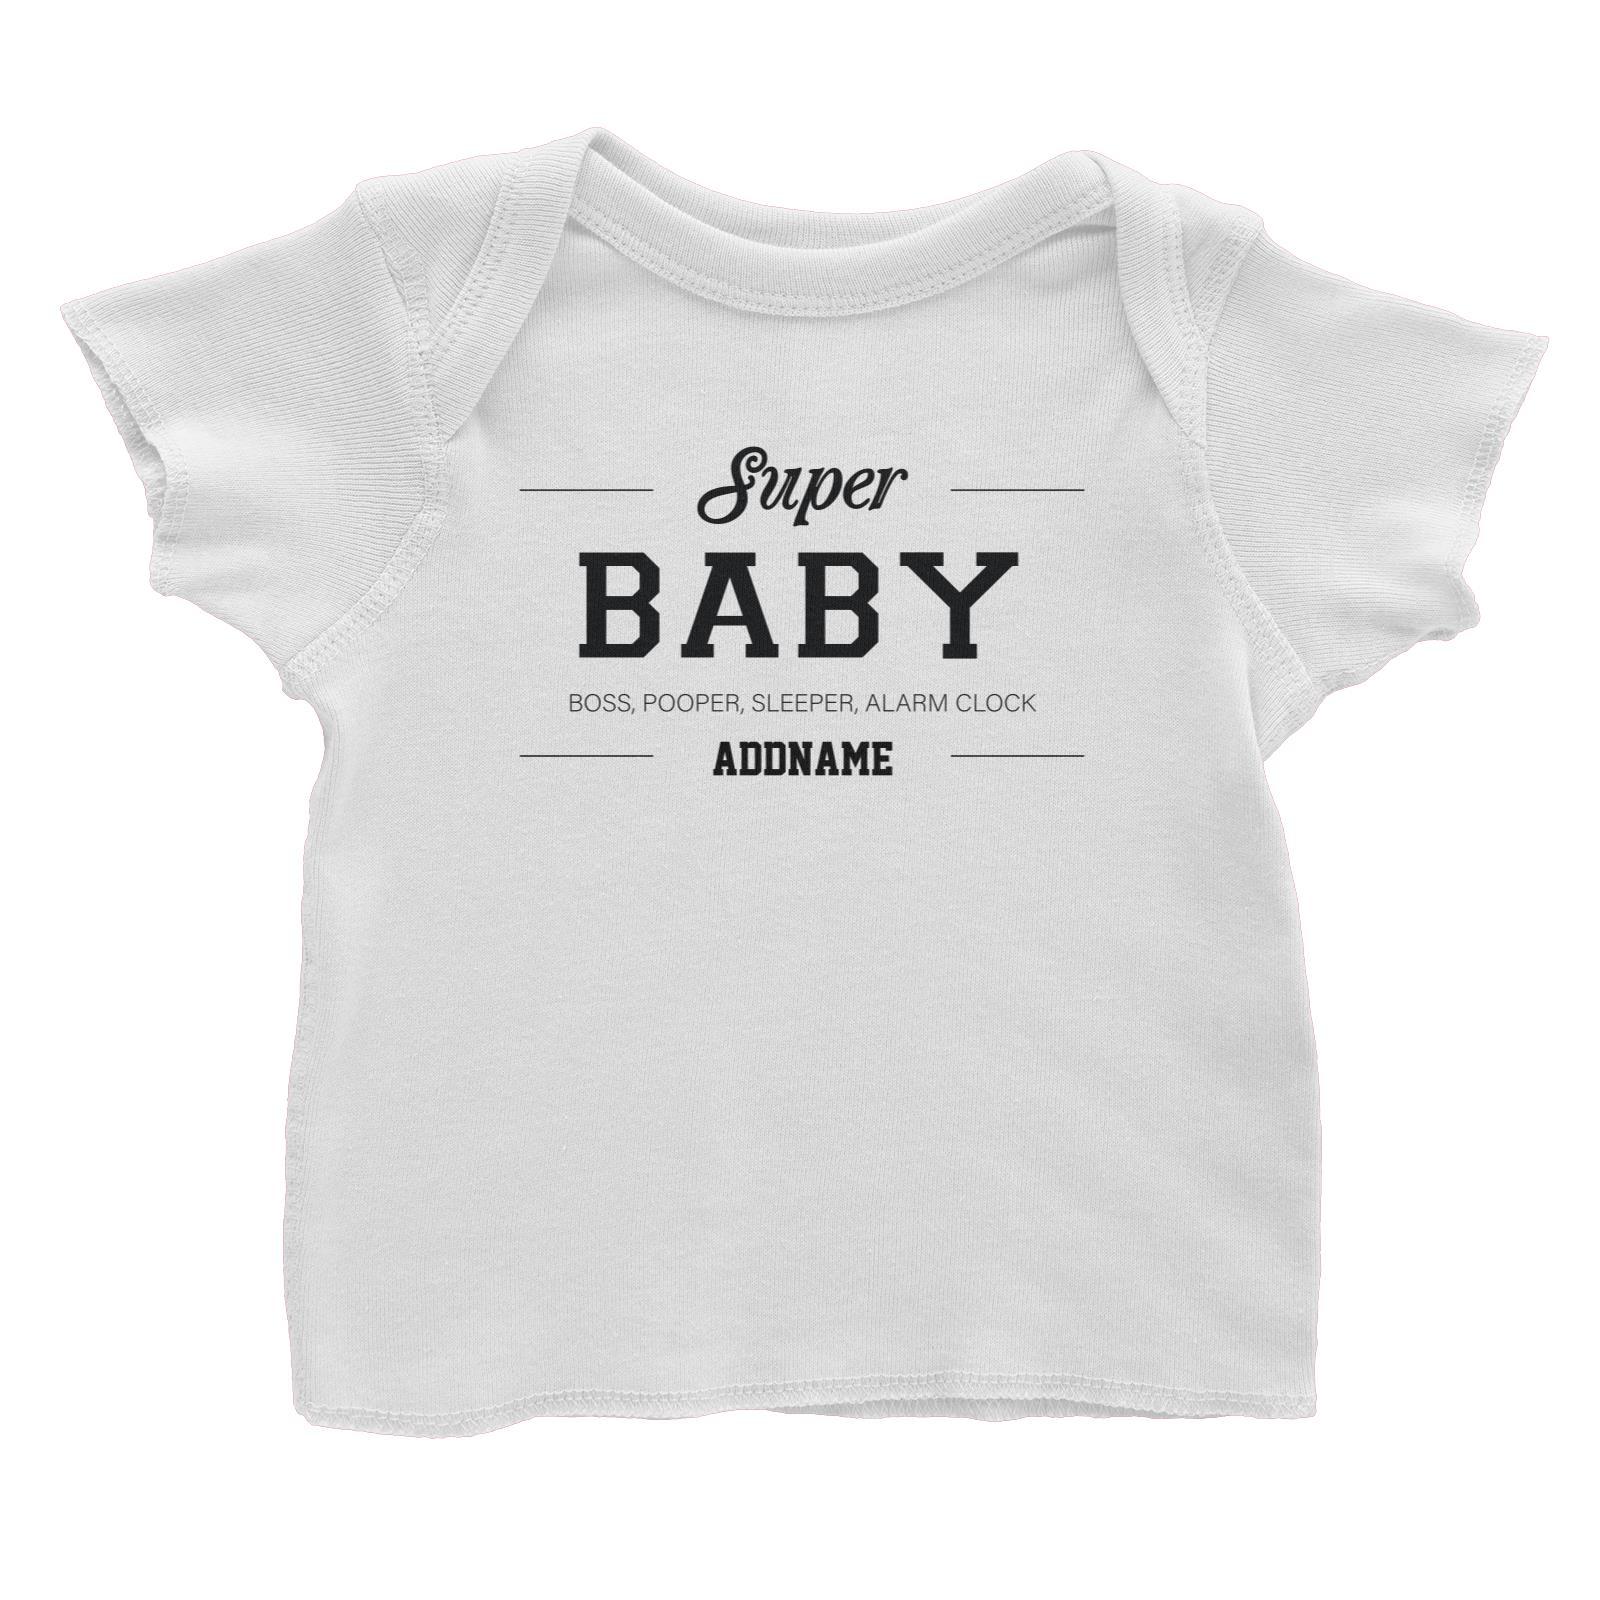 Super Definition Family Super Baby Addname Baby T-Shirt